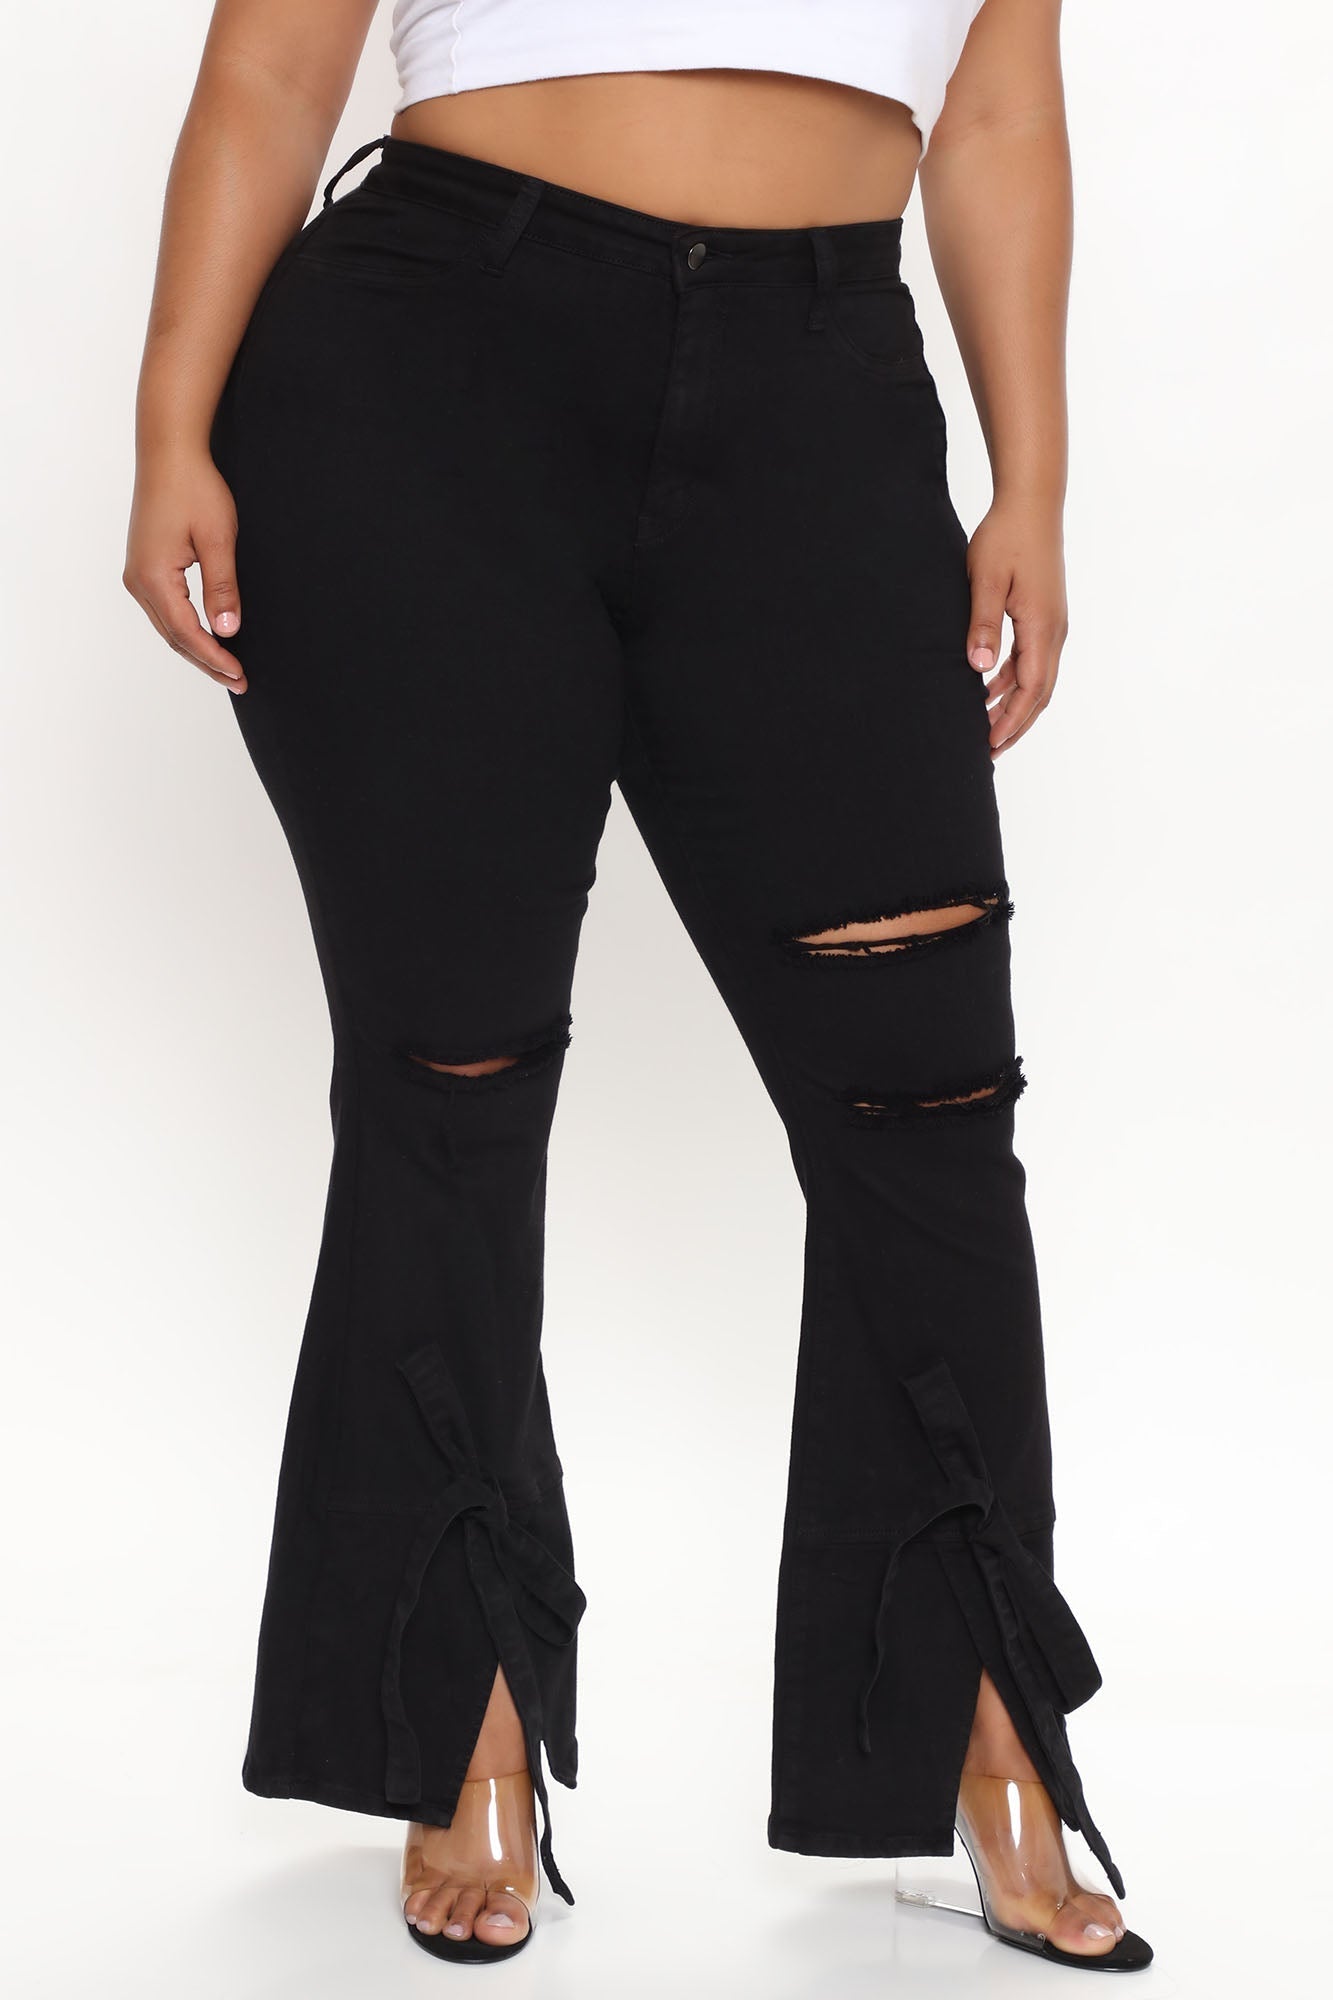 Tied To Let Ya Know Ripped Jeans - Black – Orro Shop